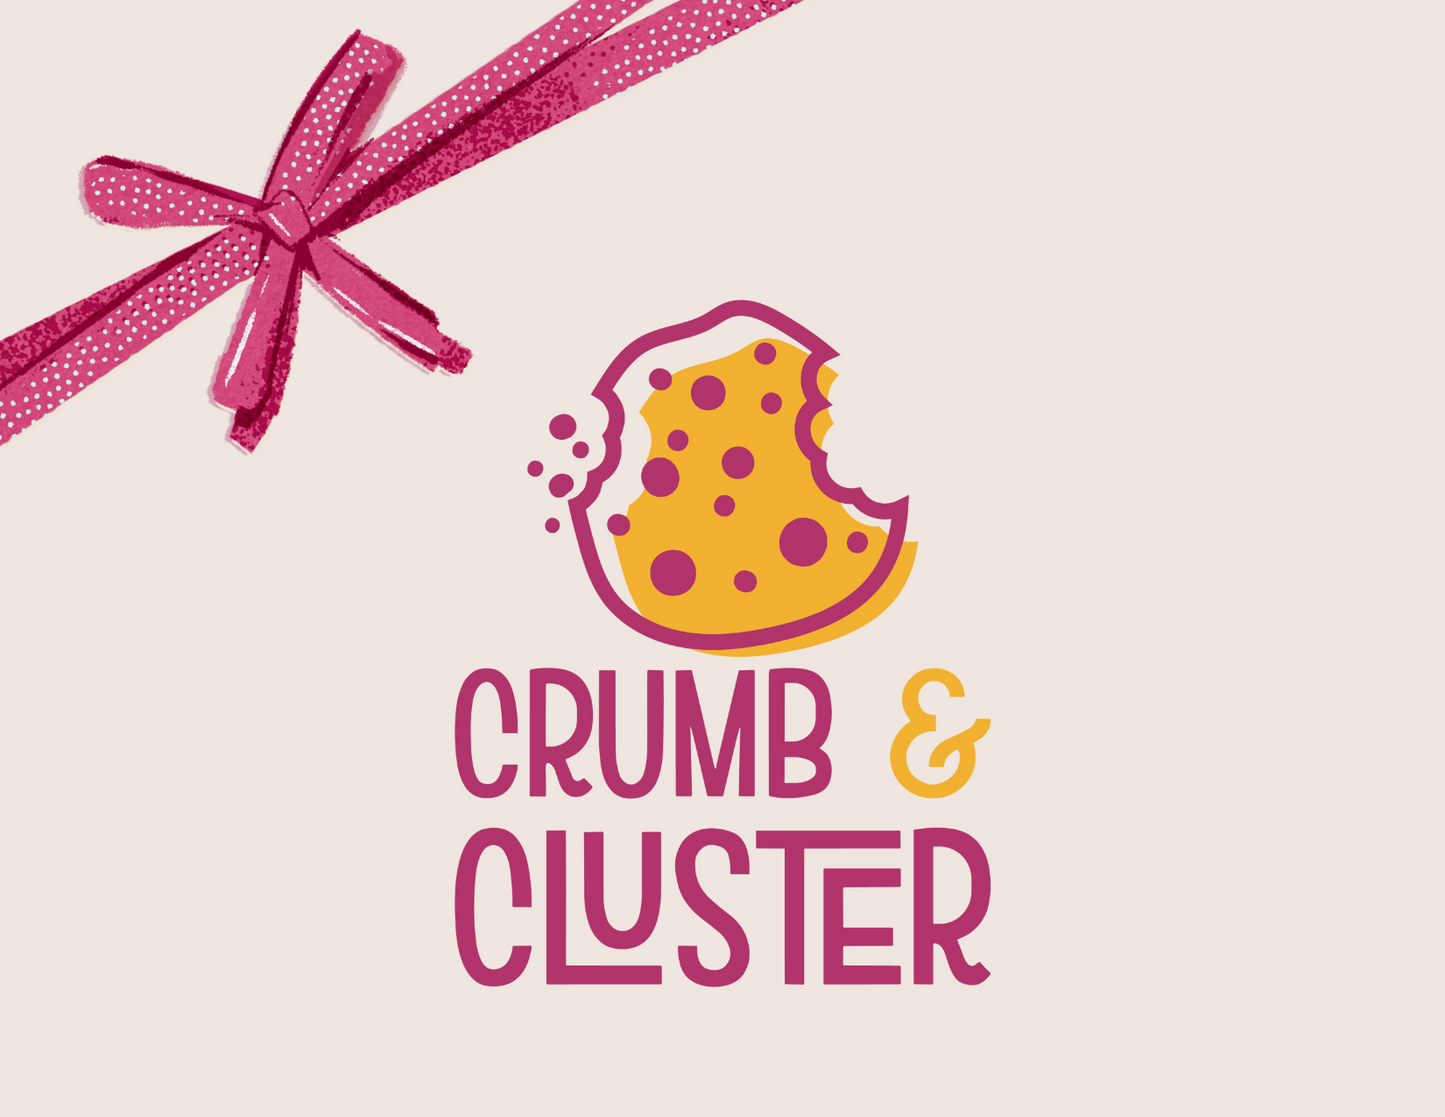 Crumb & Cluster gift cards